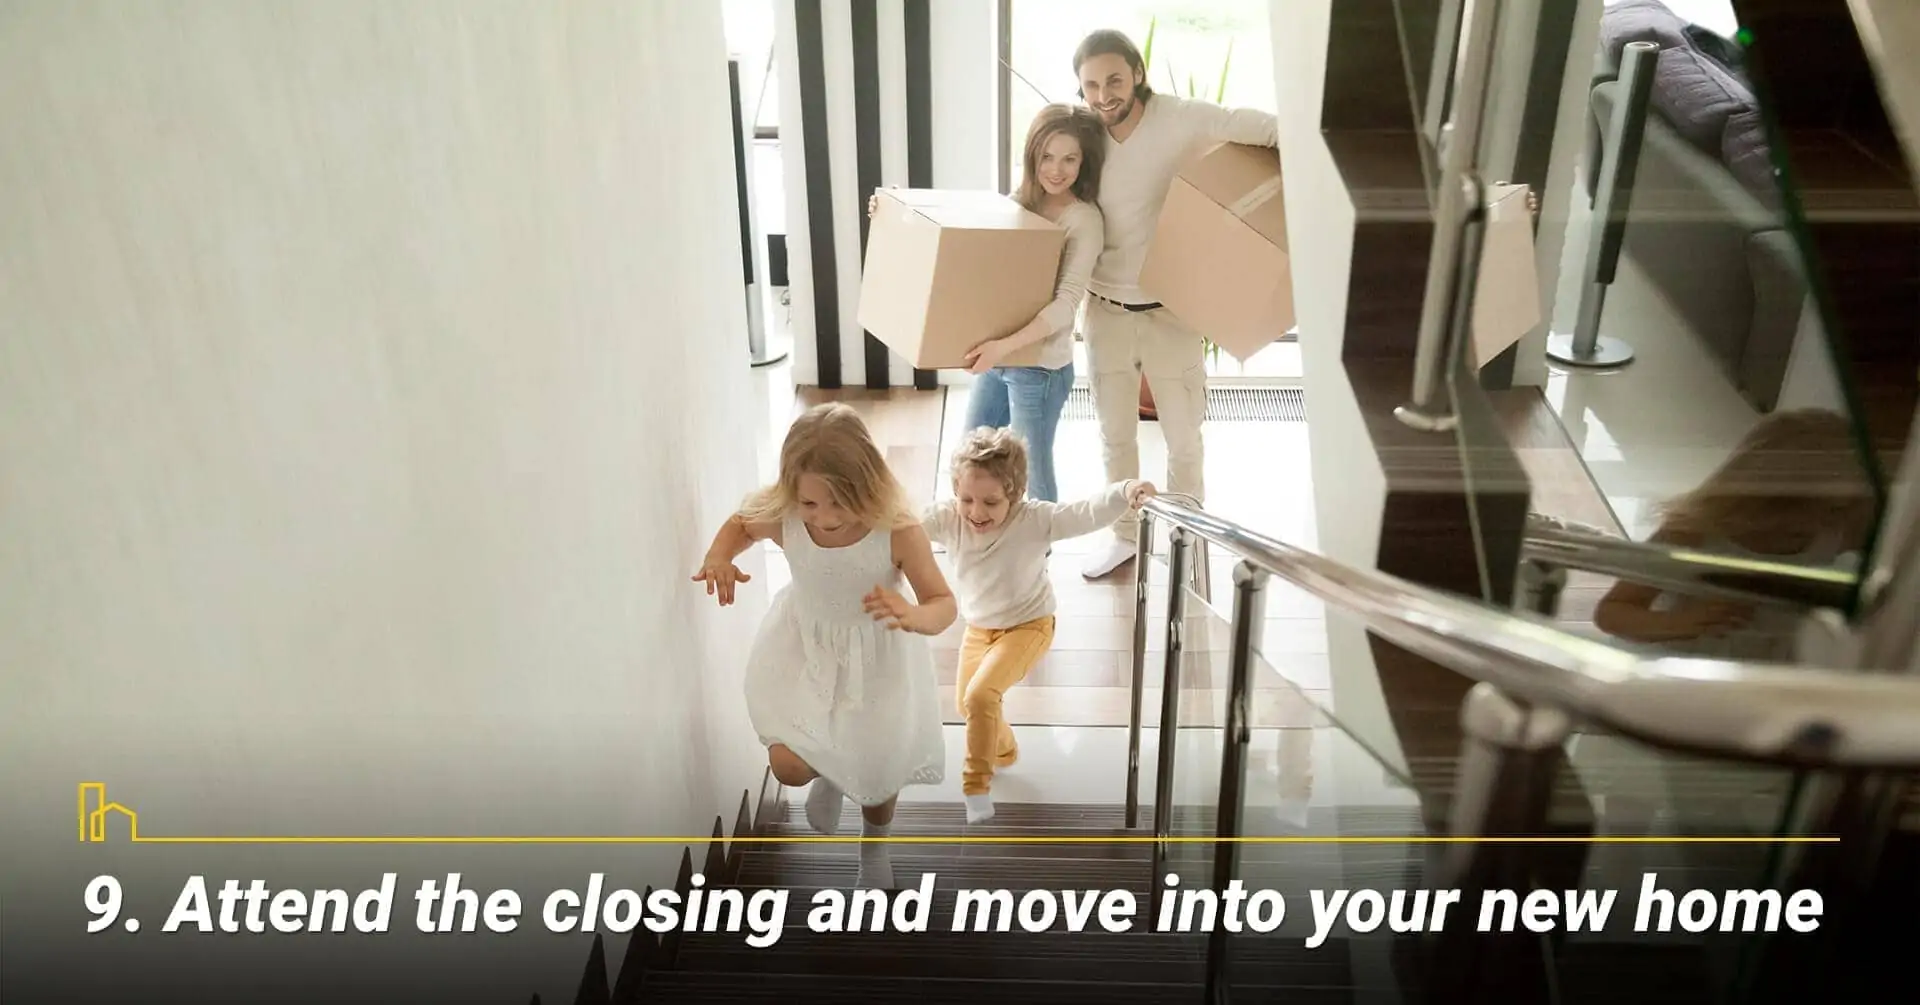 Attend the closing and move into your new home, final steps in buying a home